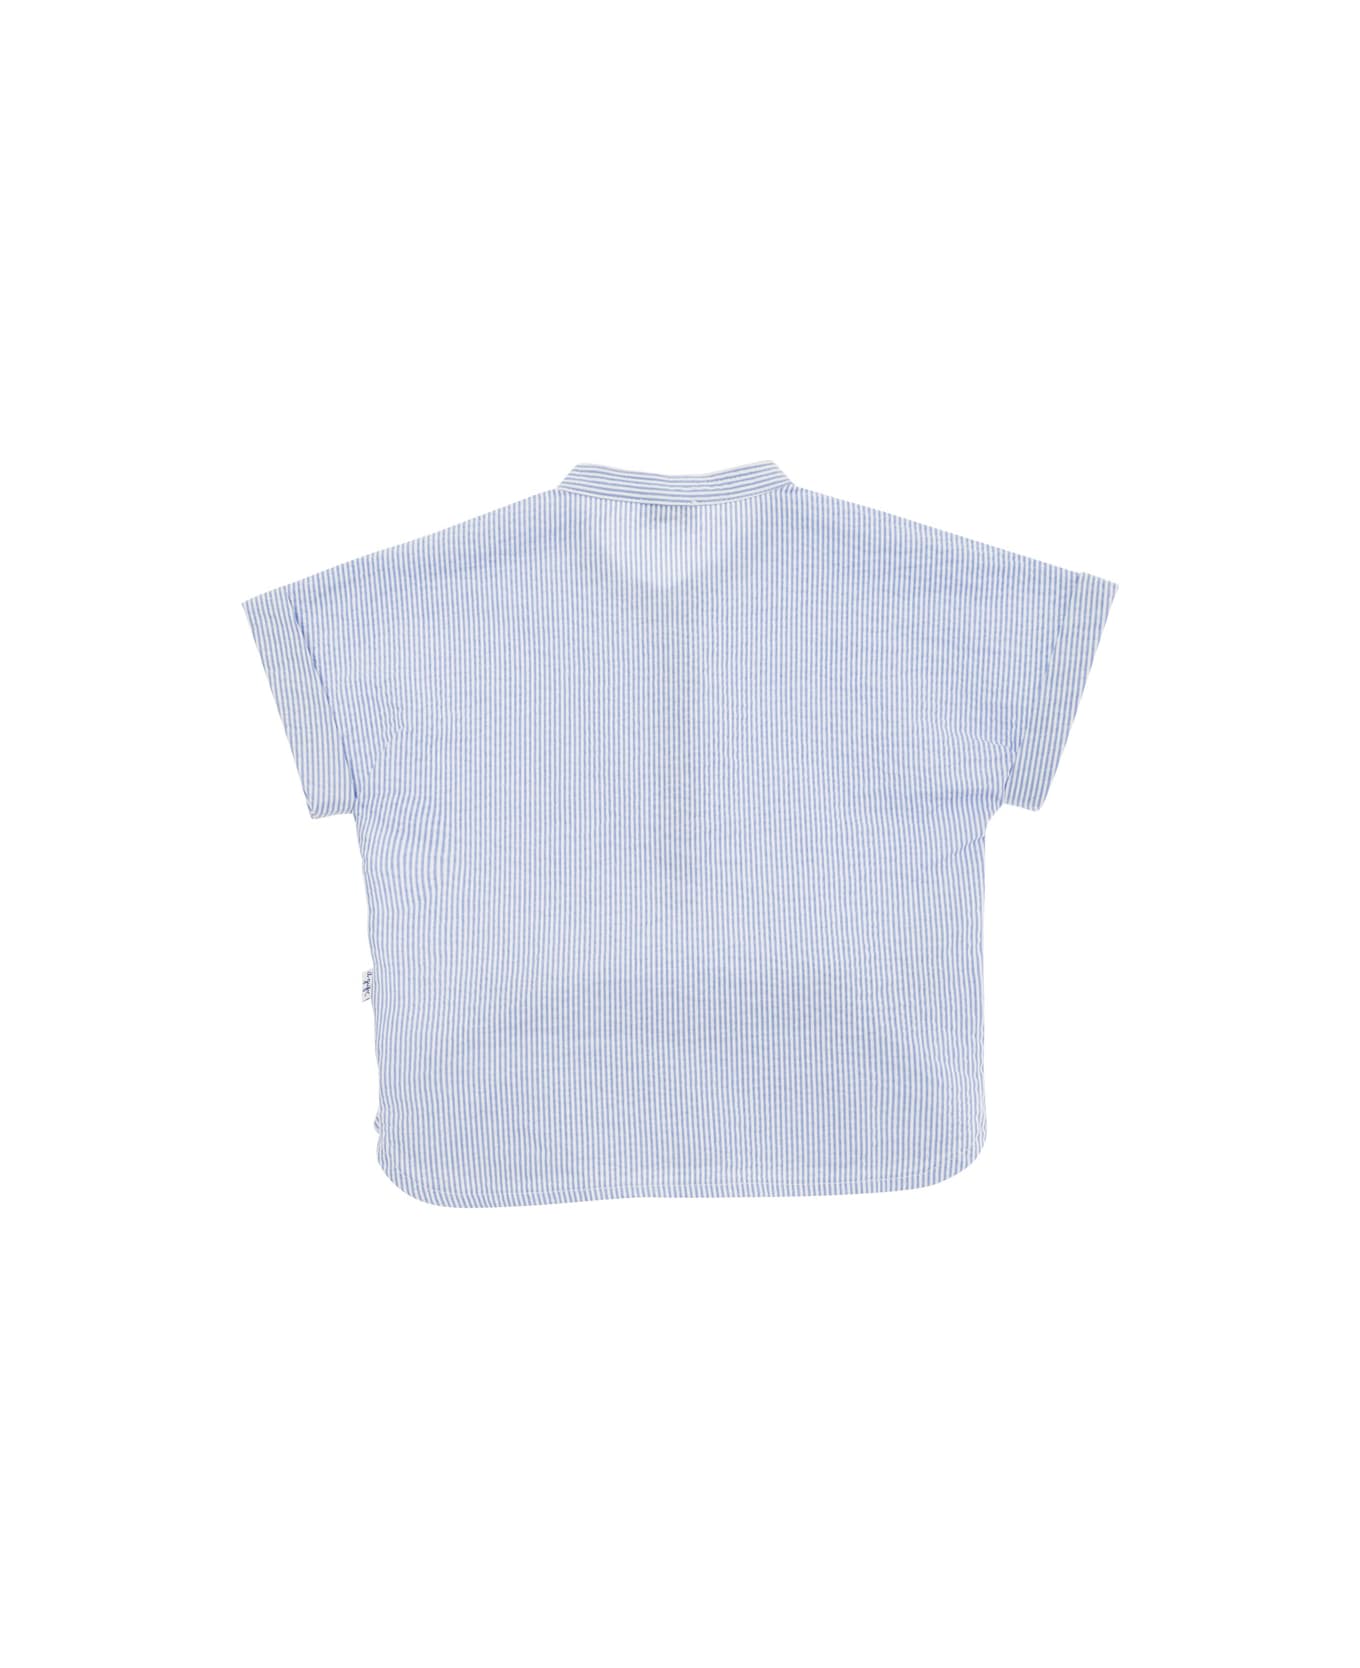 Il Gufo Light Blue And White Shirt And Pants Set In Stretch Cotton Baby - Multicolor